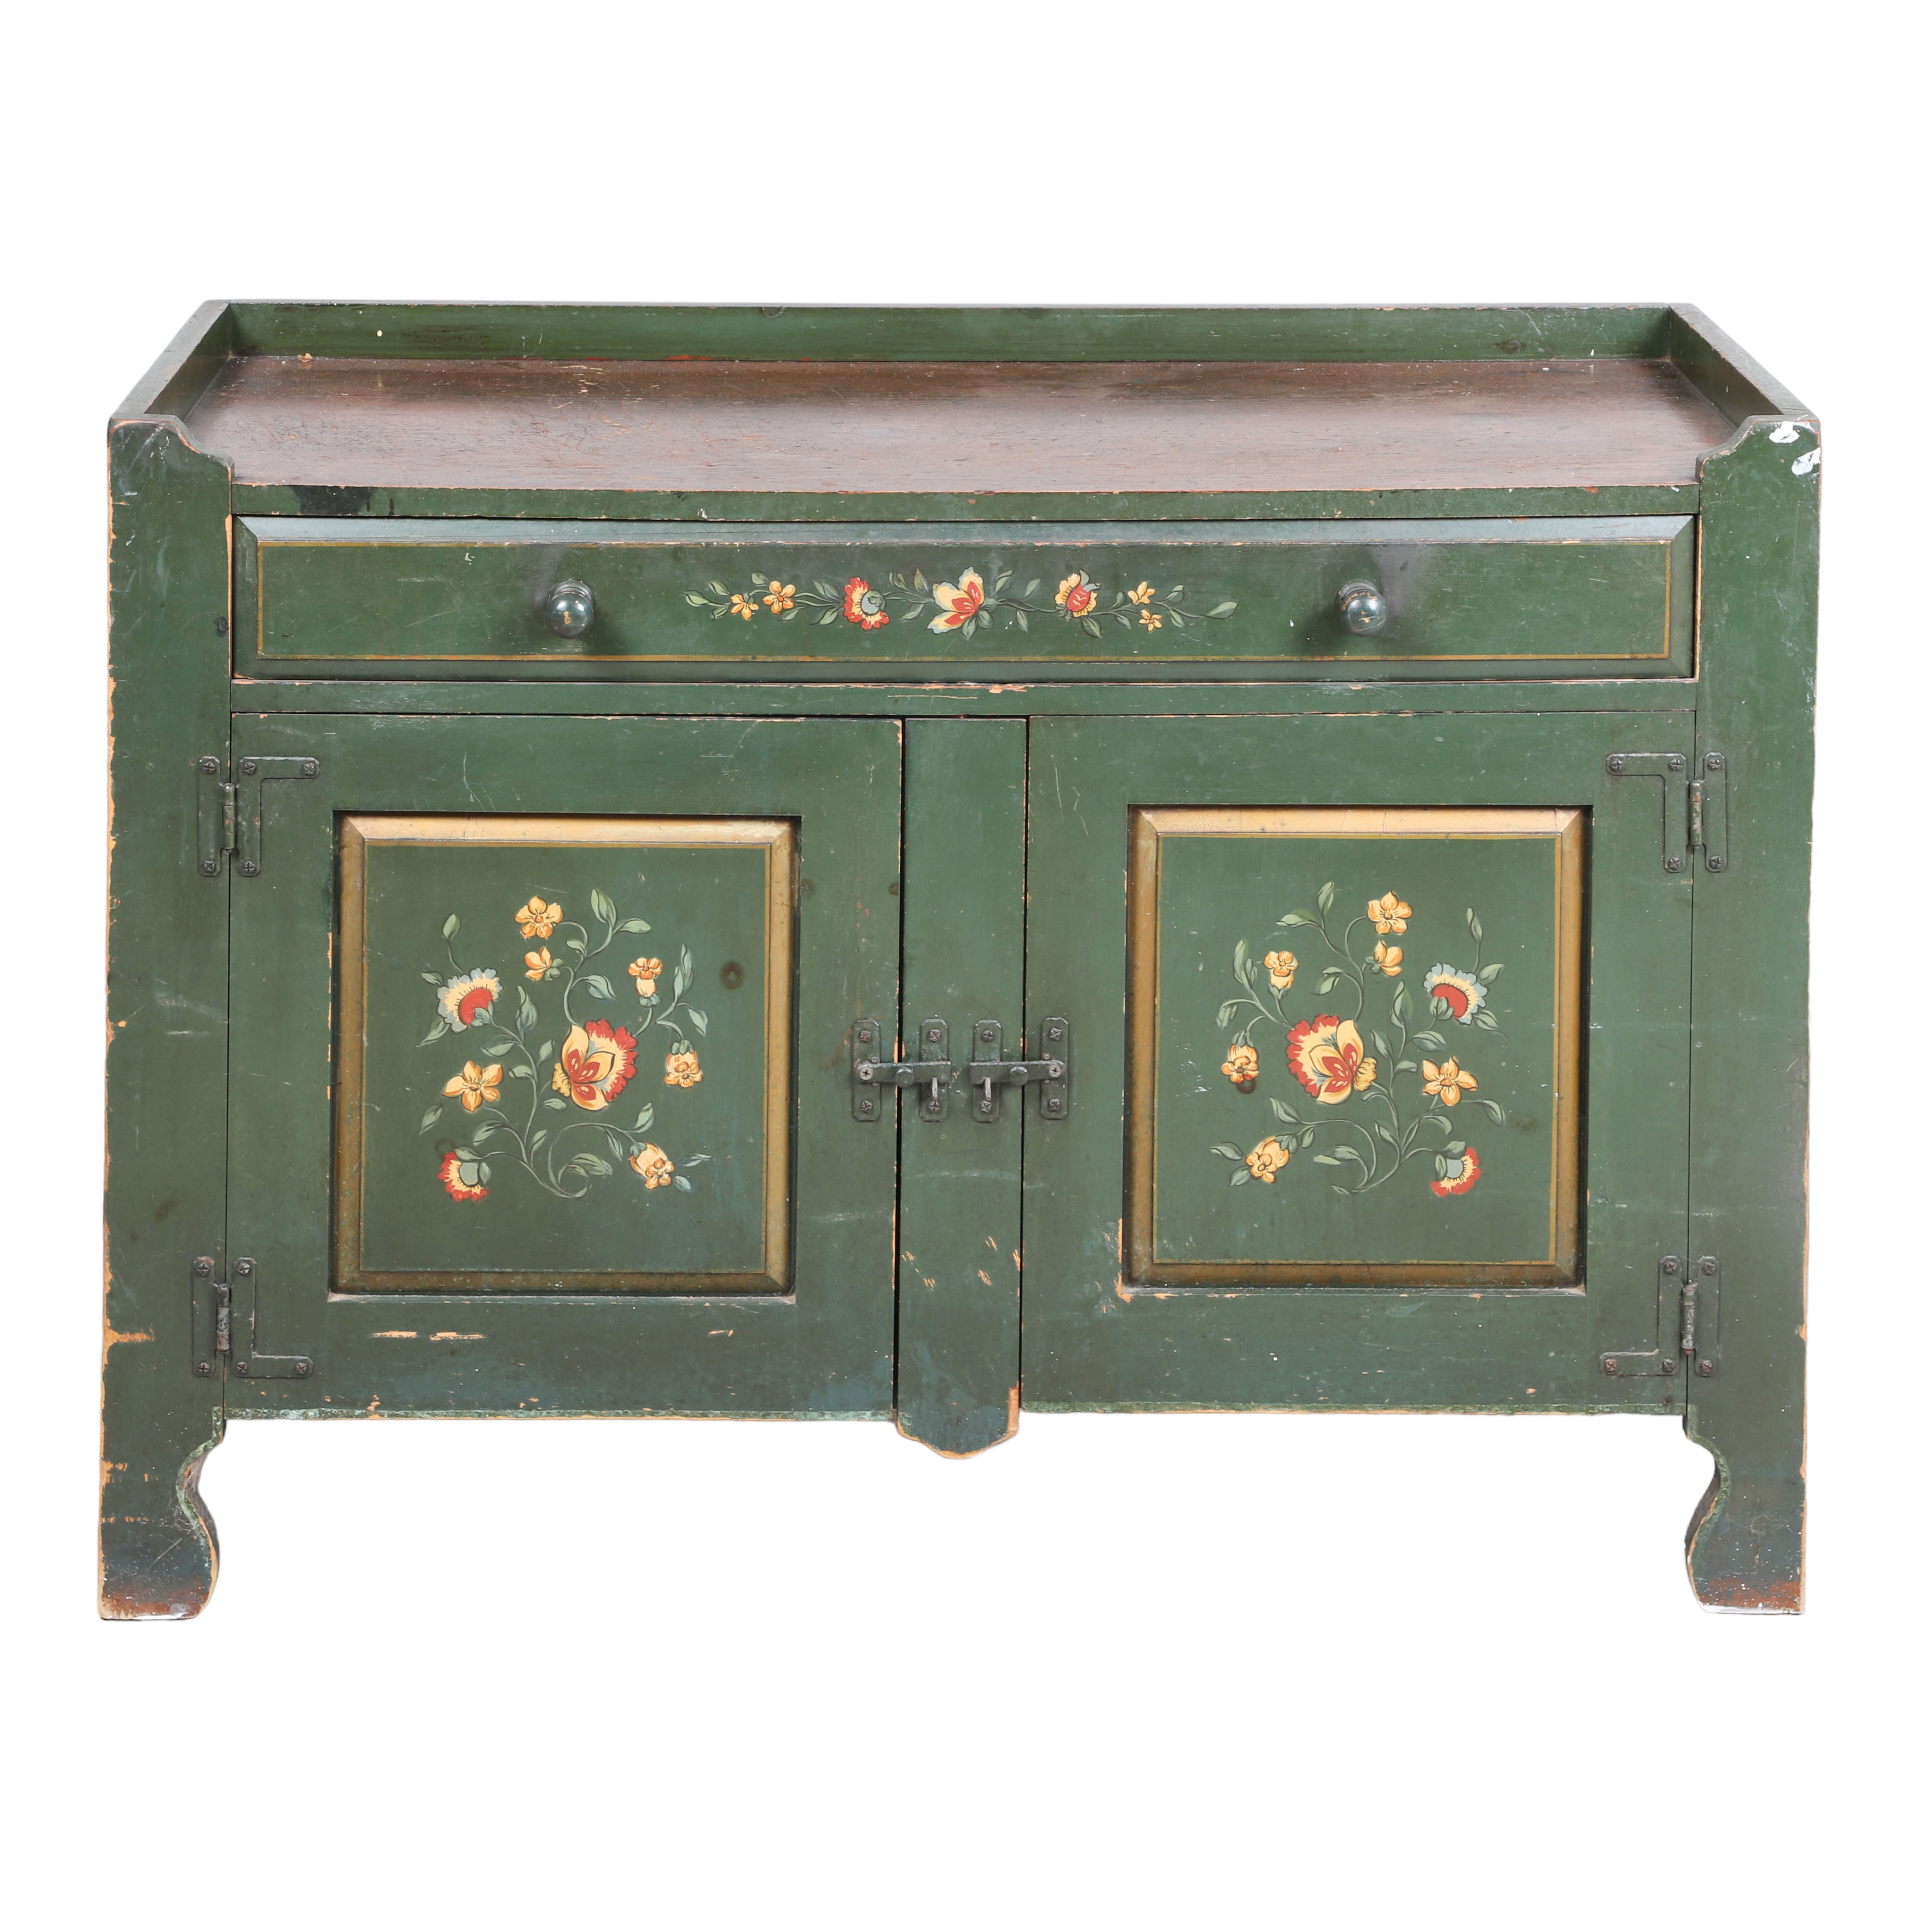 Drexel Pine paint decorated washstand,